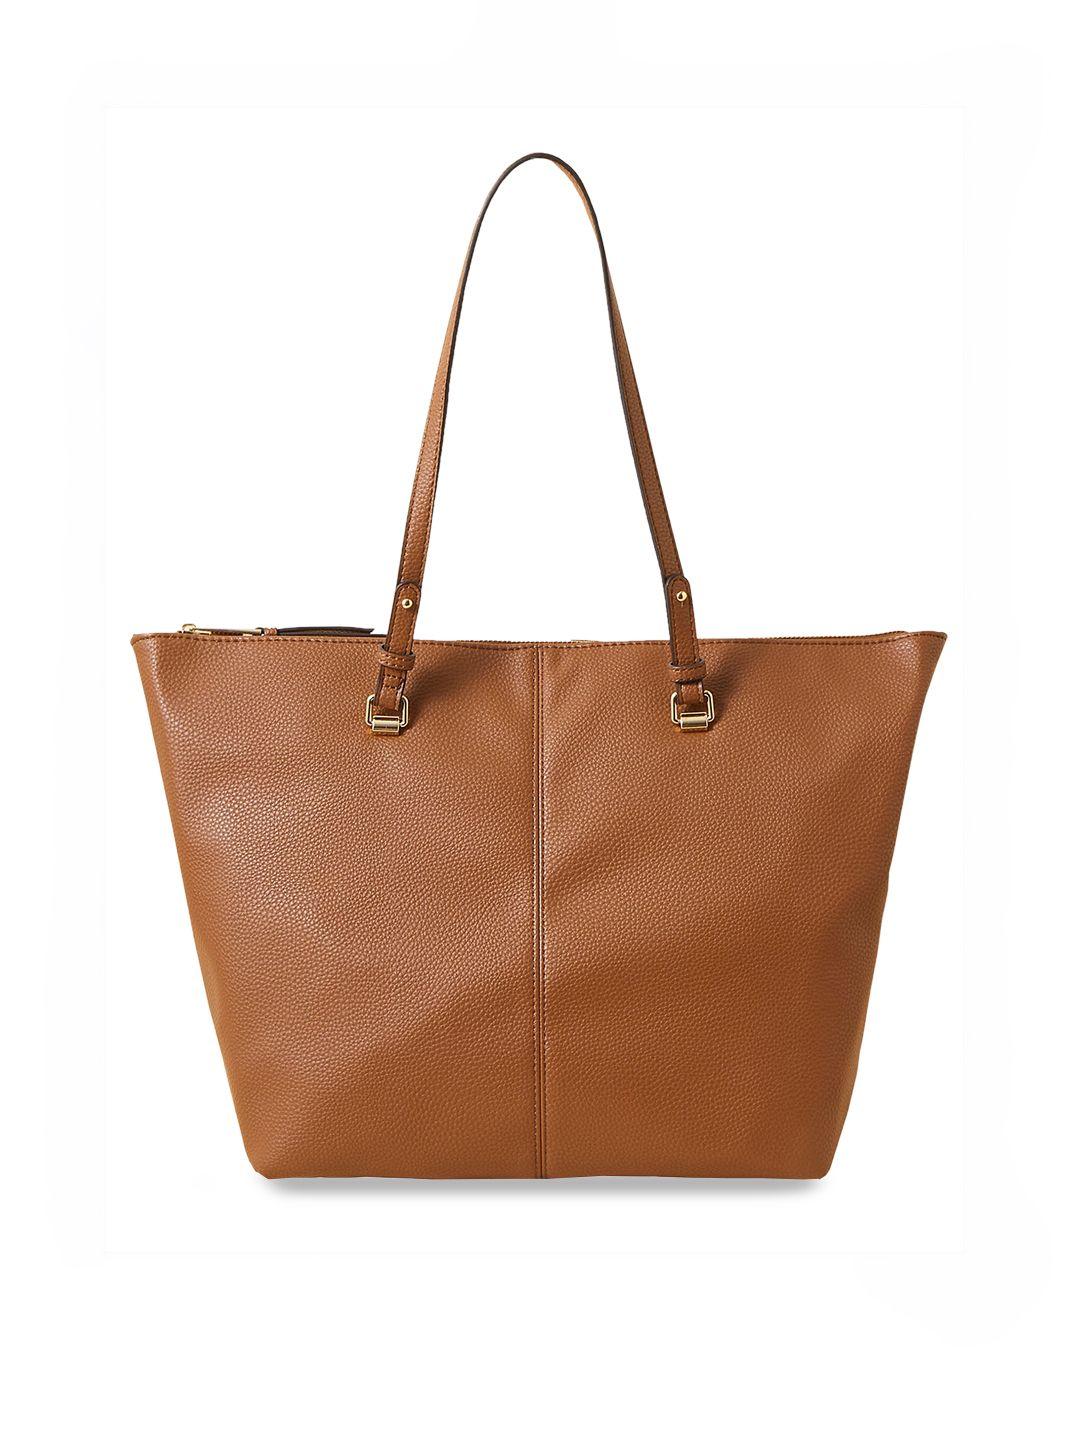 accessorize textured faux leather oversized structured tote bag